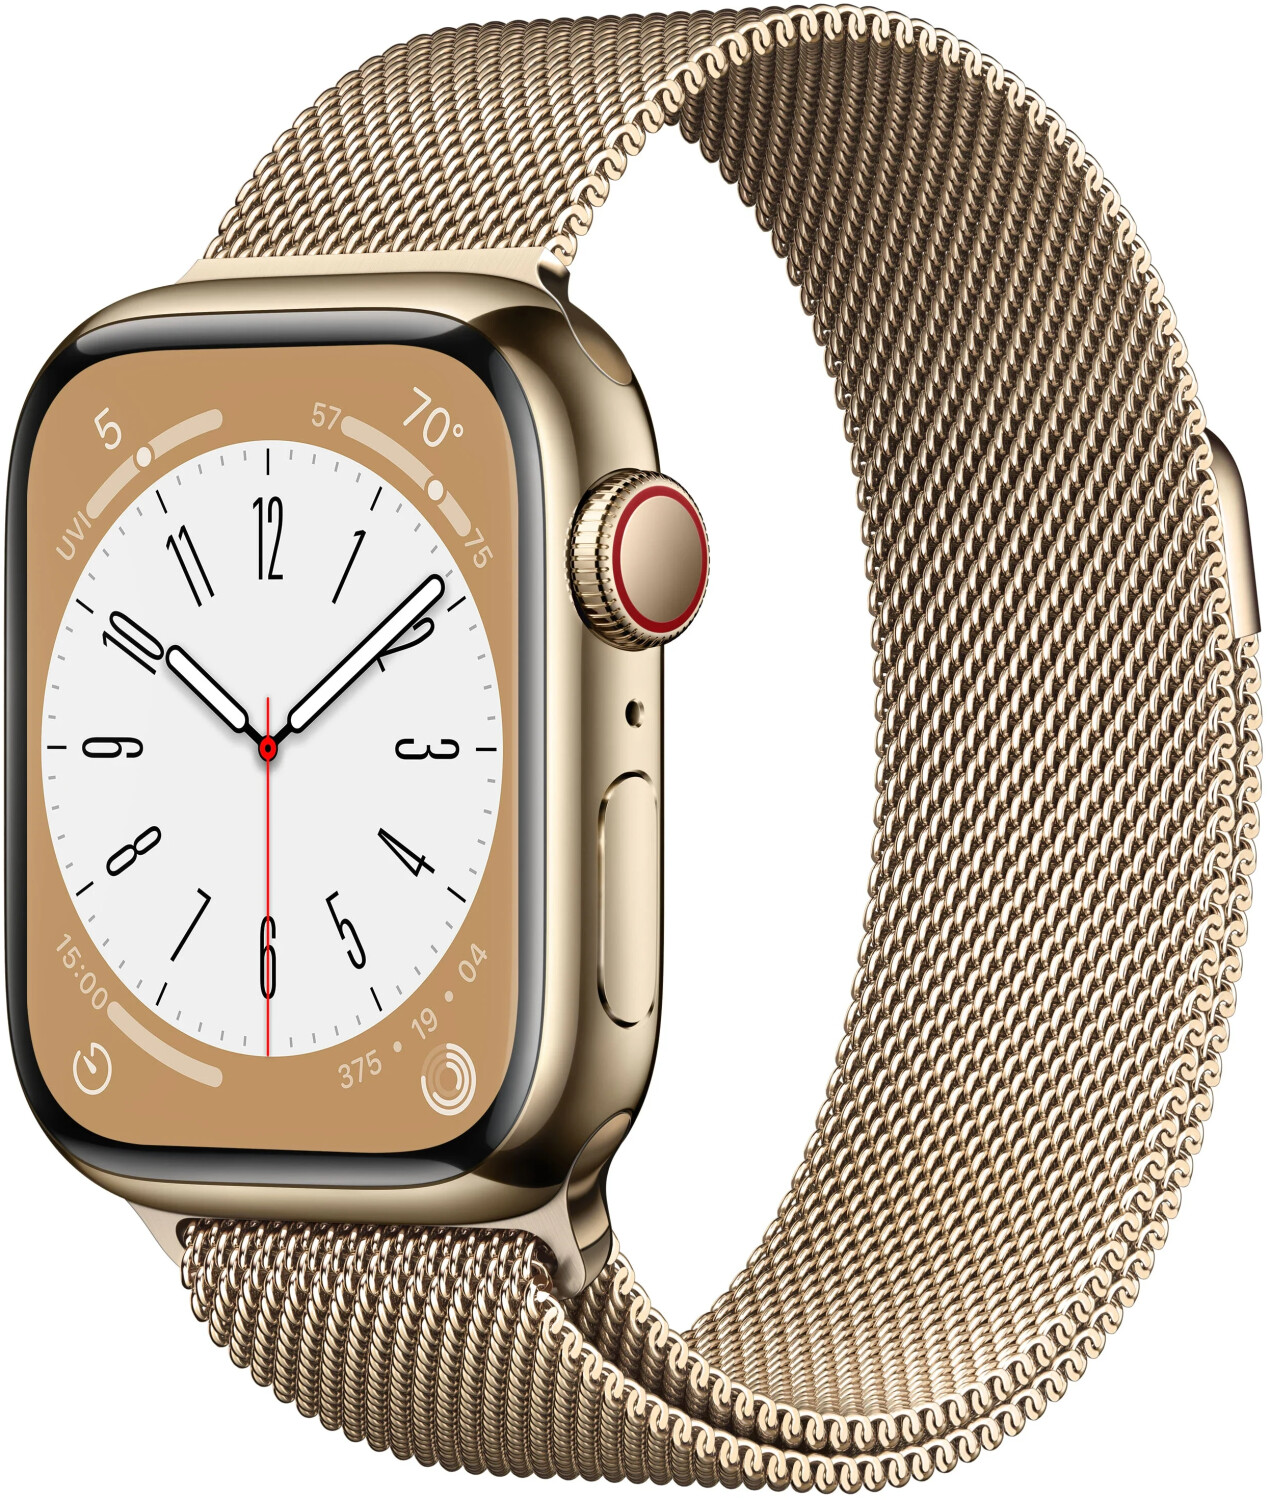 Watch 8 45 мм. Эппл вотч 8. Apple watch Series 8 Stainless Steel. Apple watch Series 8 GPS+Cellular 41mm Gold Stainless Steel Case with Gold Milanese. Apple watch 7 45mm.